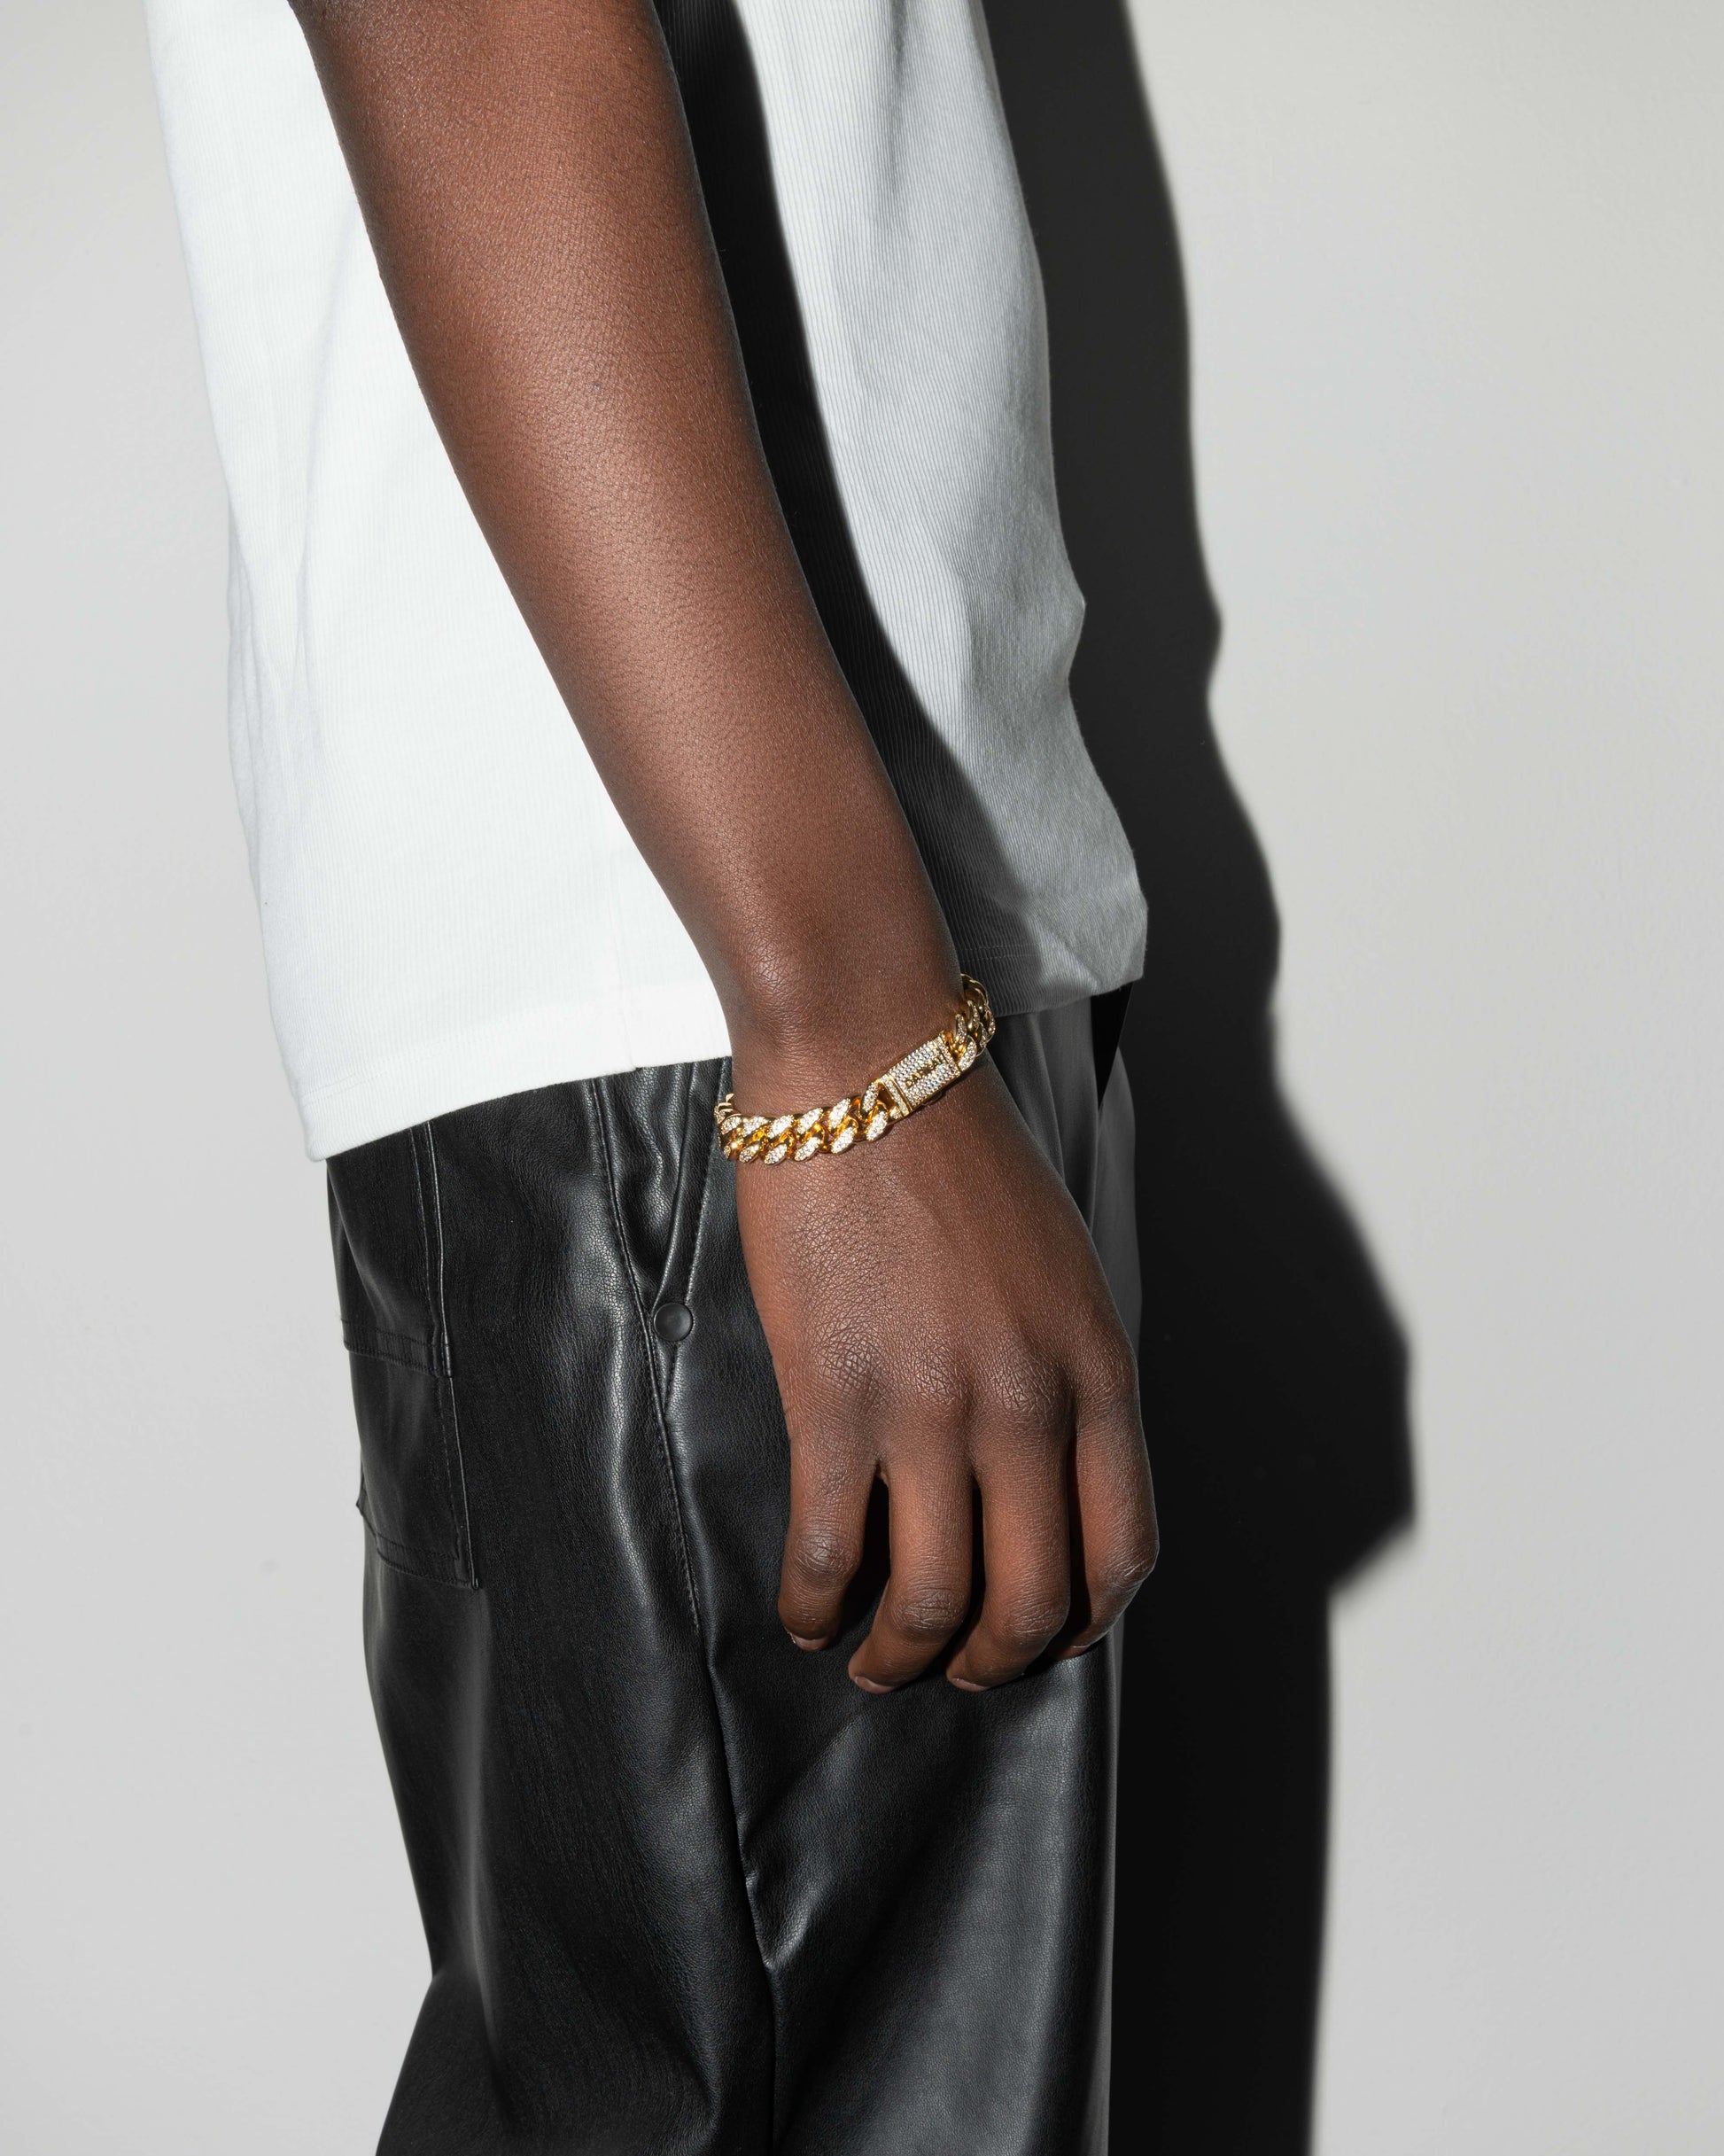 street style man wearing 18k yellow gold coated cuban chain bracelet with hand-set micropavé stones in white